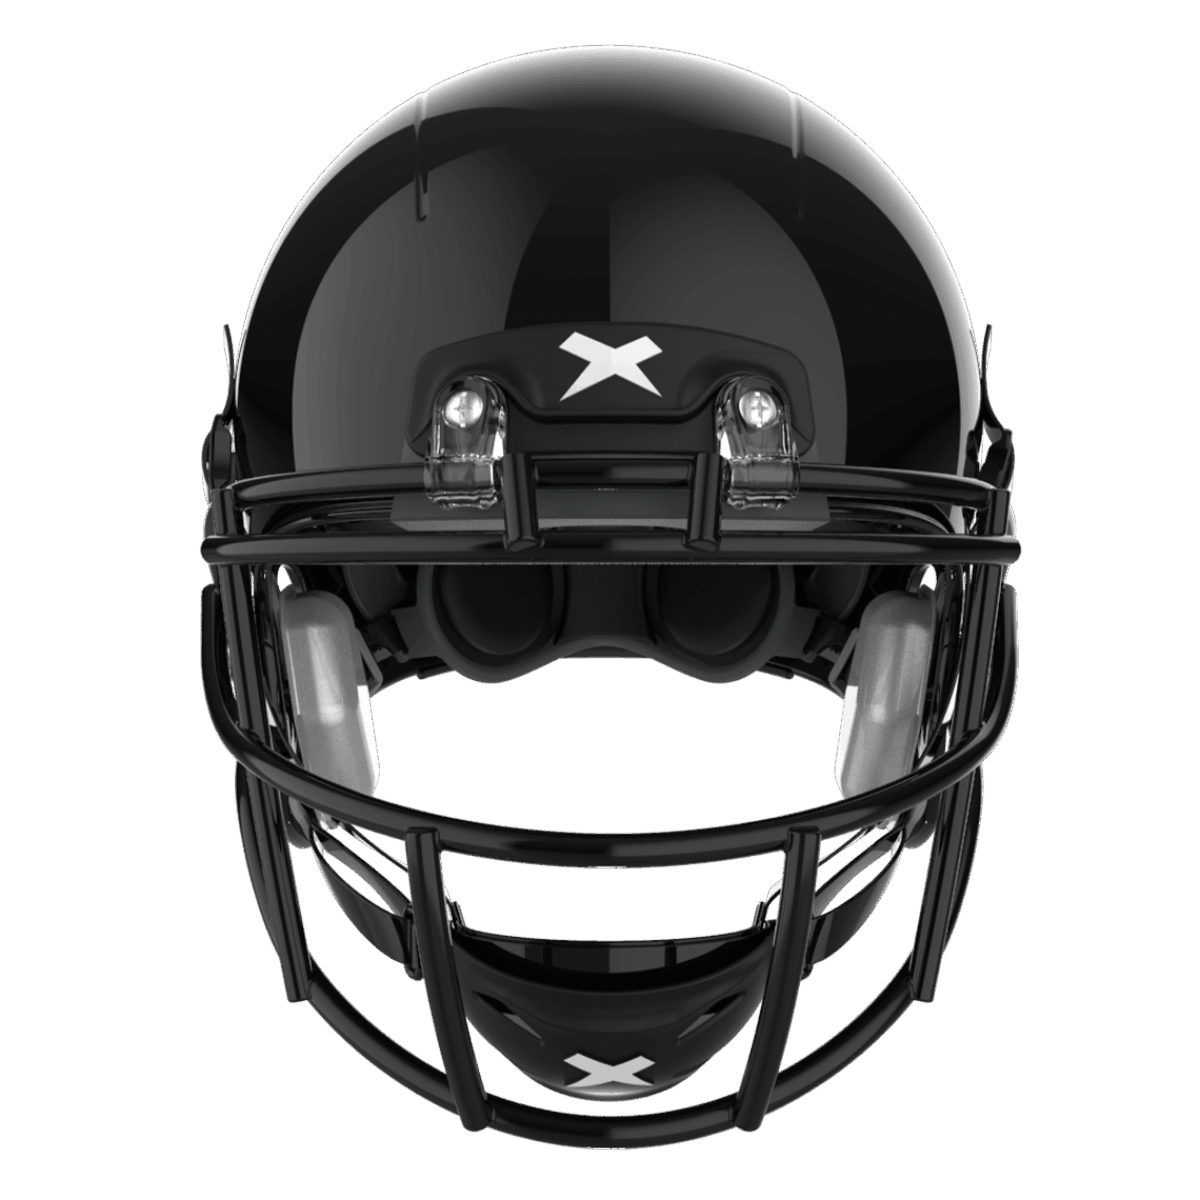 Front view X2E+ football helmet with black shell and black Prime facemask.